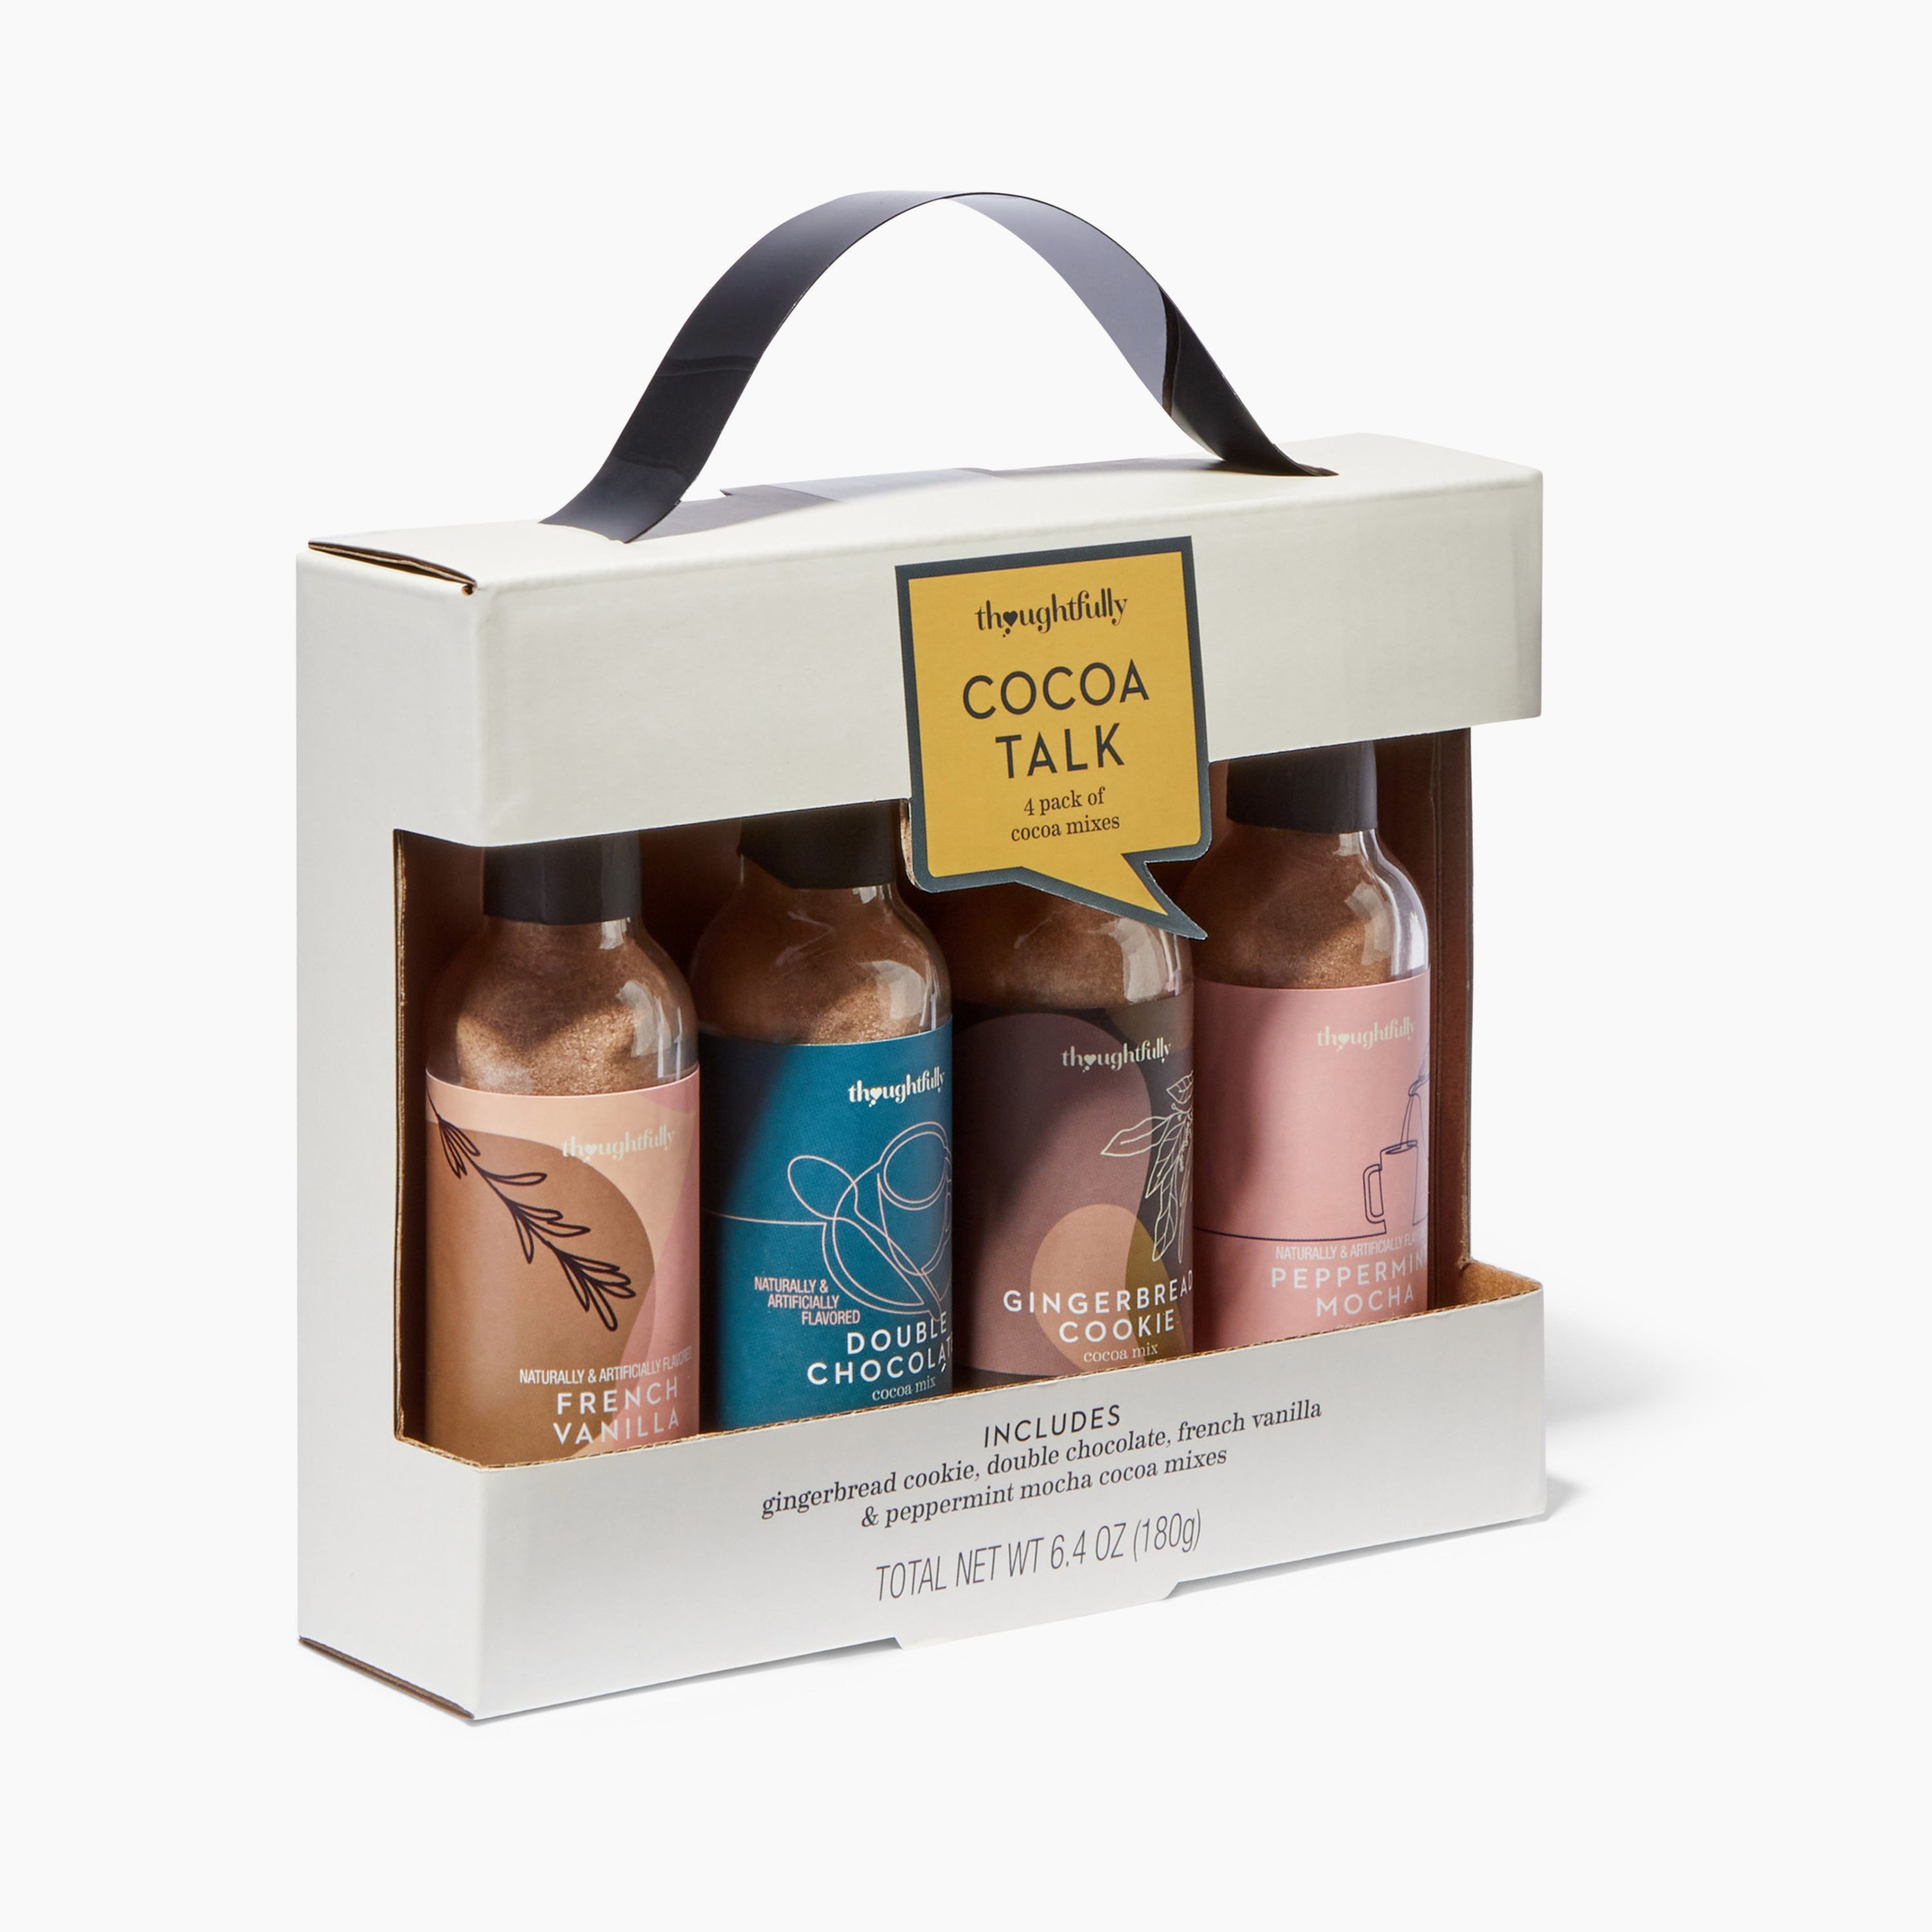 Cocoa Talk Gourmet Hot Chocolate Mixes Gift Set, Pack of 4